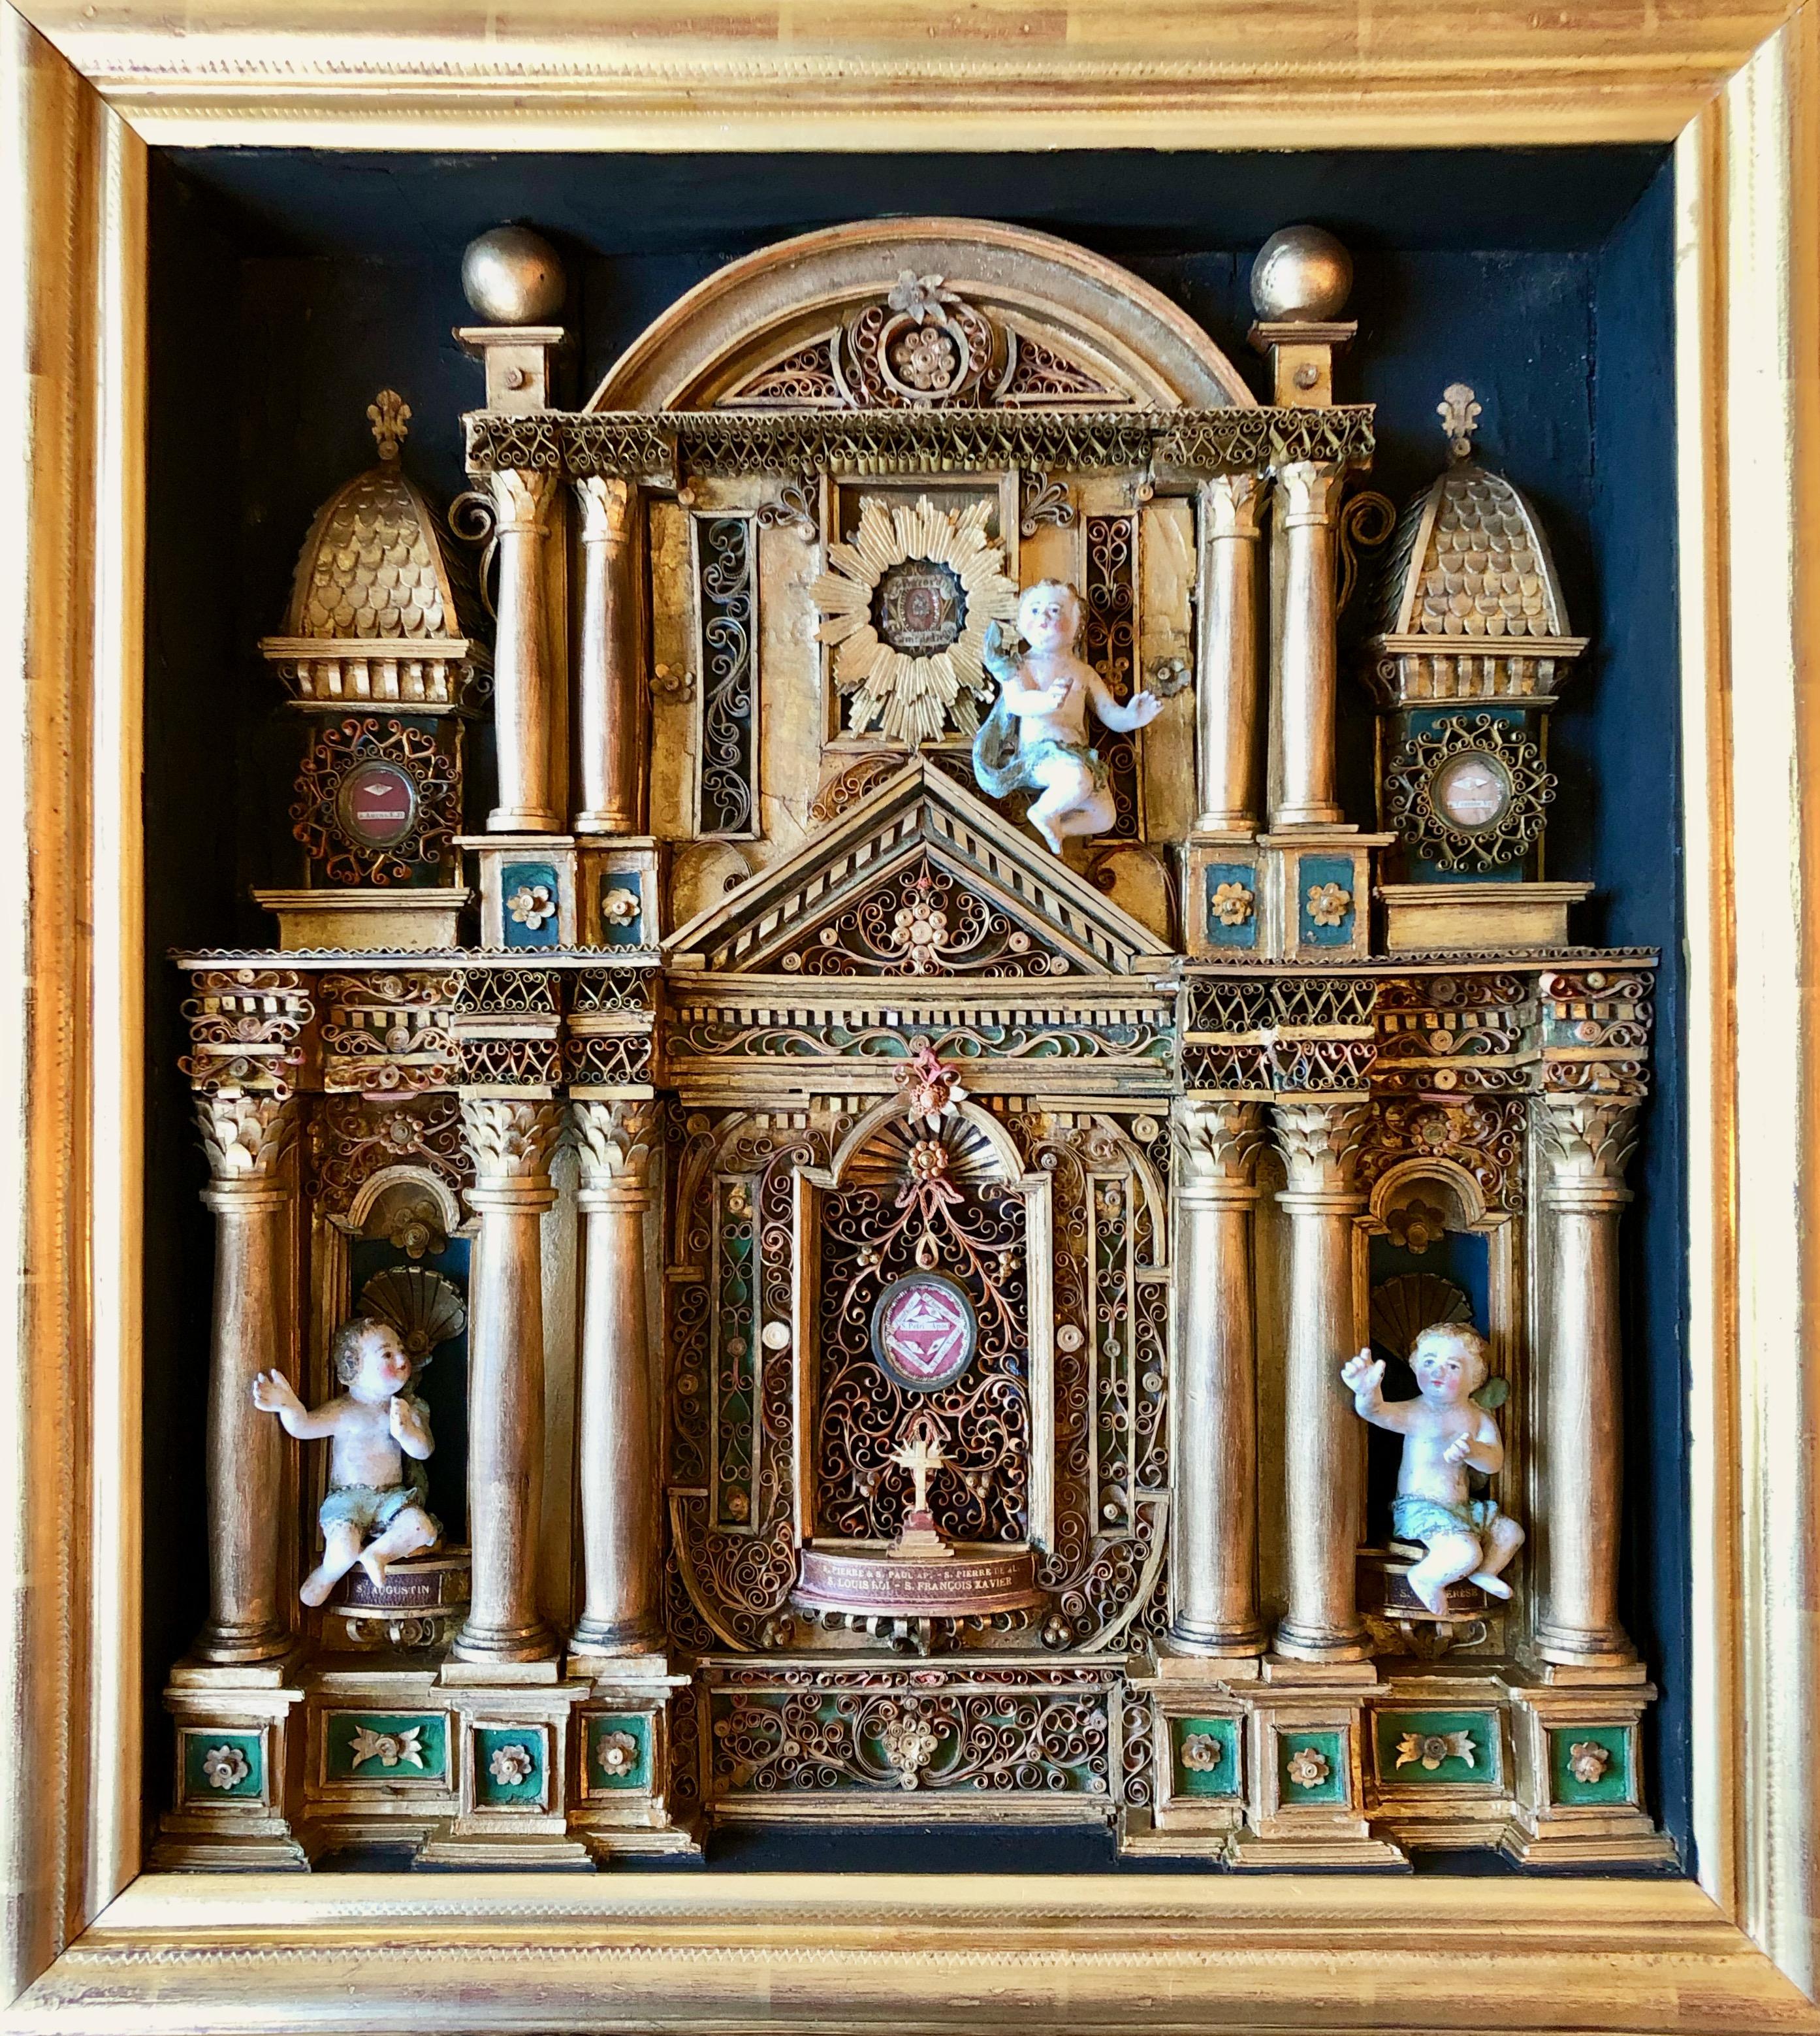 This is an absolutely gorgeous 19th century French reliquary (reliquary is also referred to as a shrine) and includes relics of 4 Saints-St Cam. de Leffis, S. Augus. E.D., S. Teresiae Vr, S. Petri Apostle's., S. Pauli Ap., S. Ludovic Reg., S. Franc.